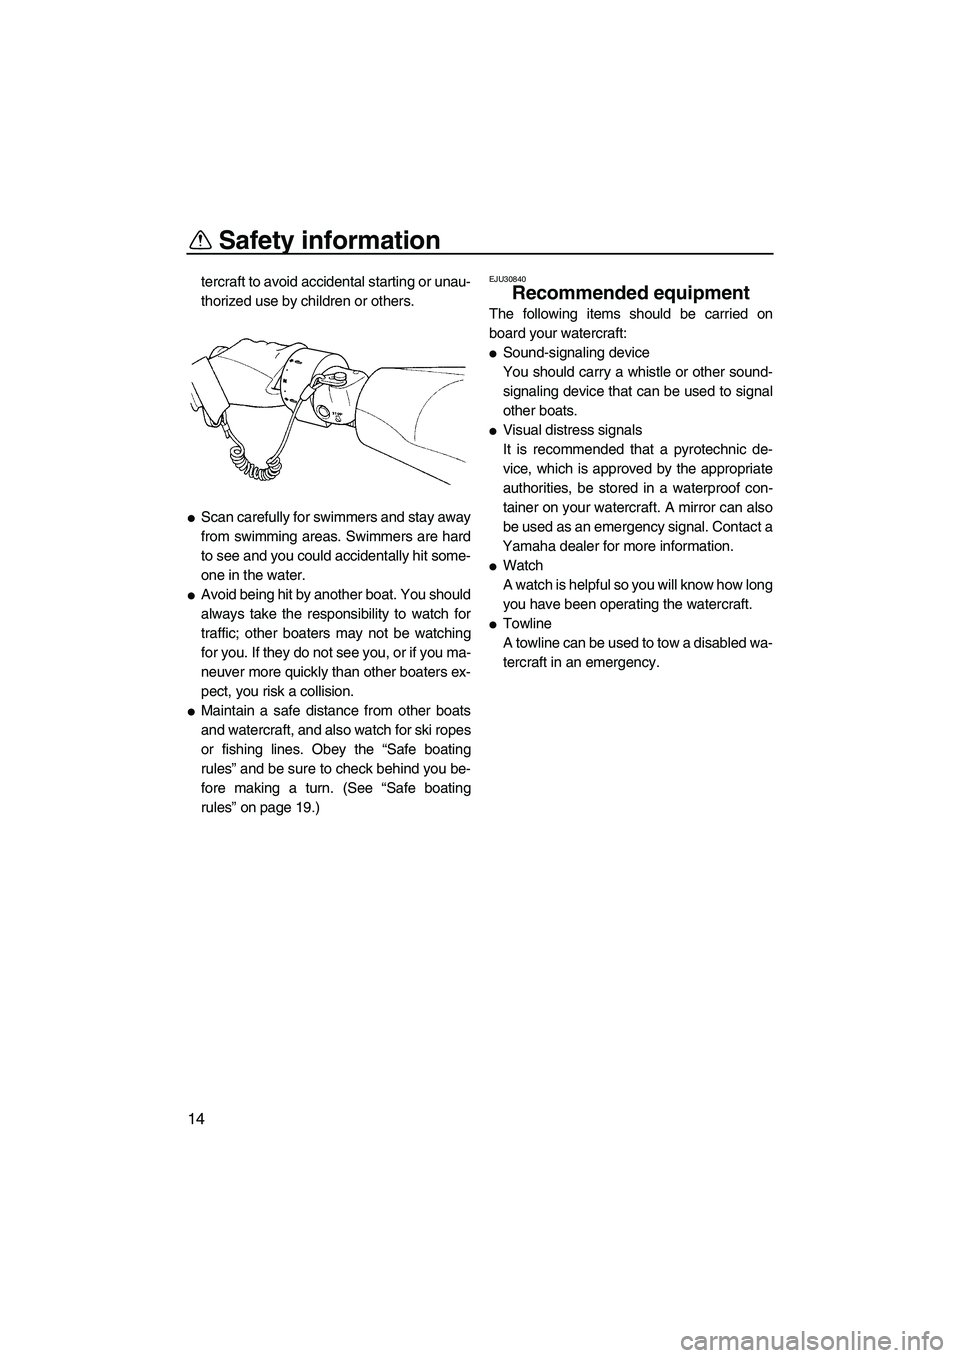 YAMAHA SVHO 2011  Owners Manual Safety information
14
tercraft to avoid accidental starting or unau-
thorized use by children or others.
Scan carefully for swimmers and stay away
from swimming areas. Swimmers are hard
to see and yo